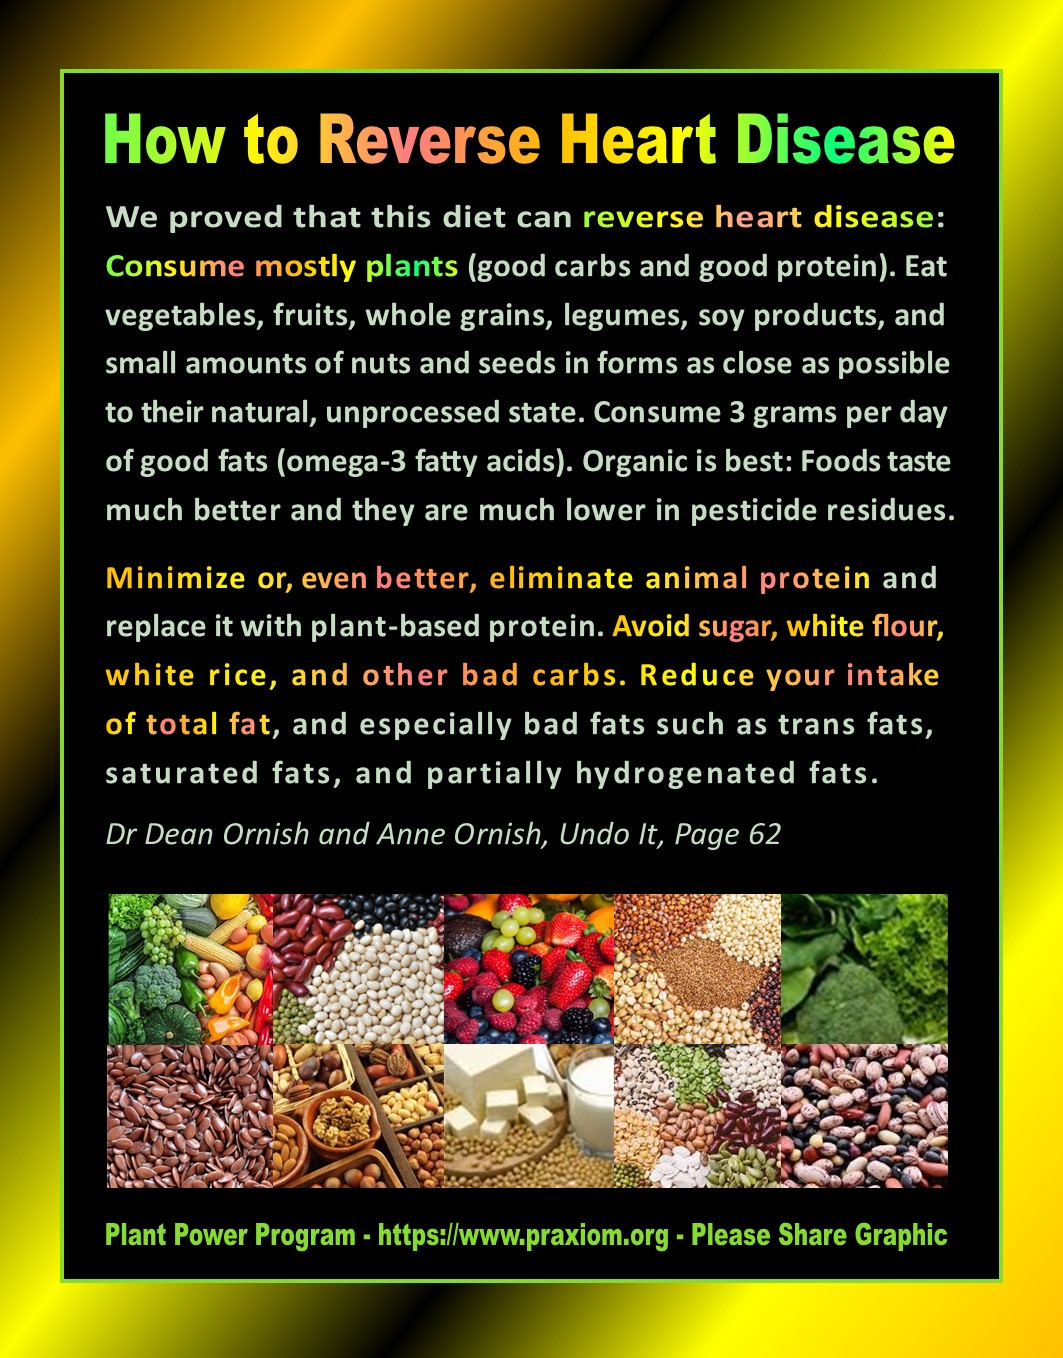 Plant Powered Diet for Heart Disease - Dr. Dean Ornish